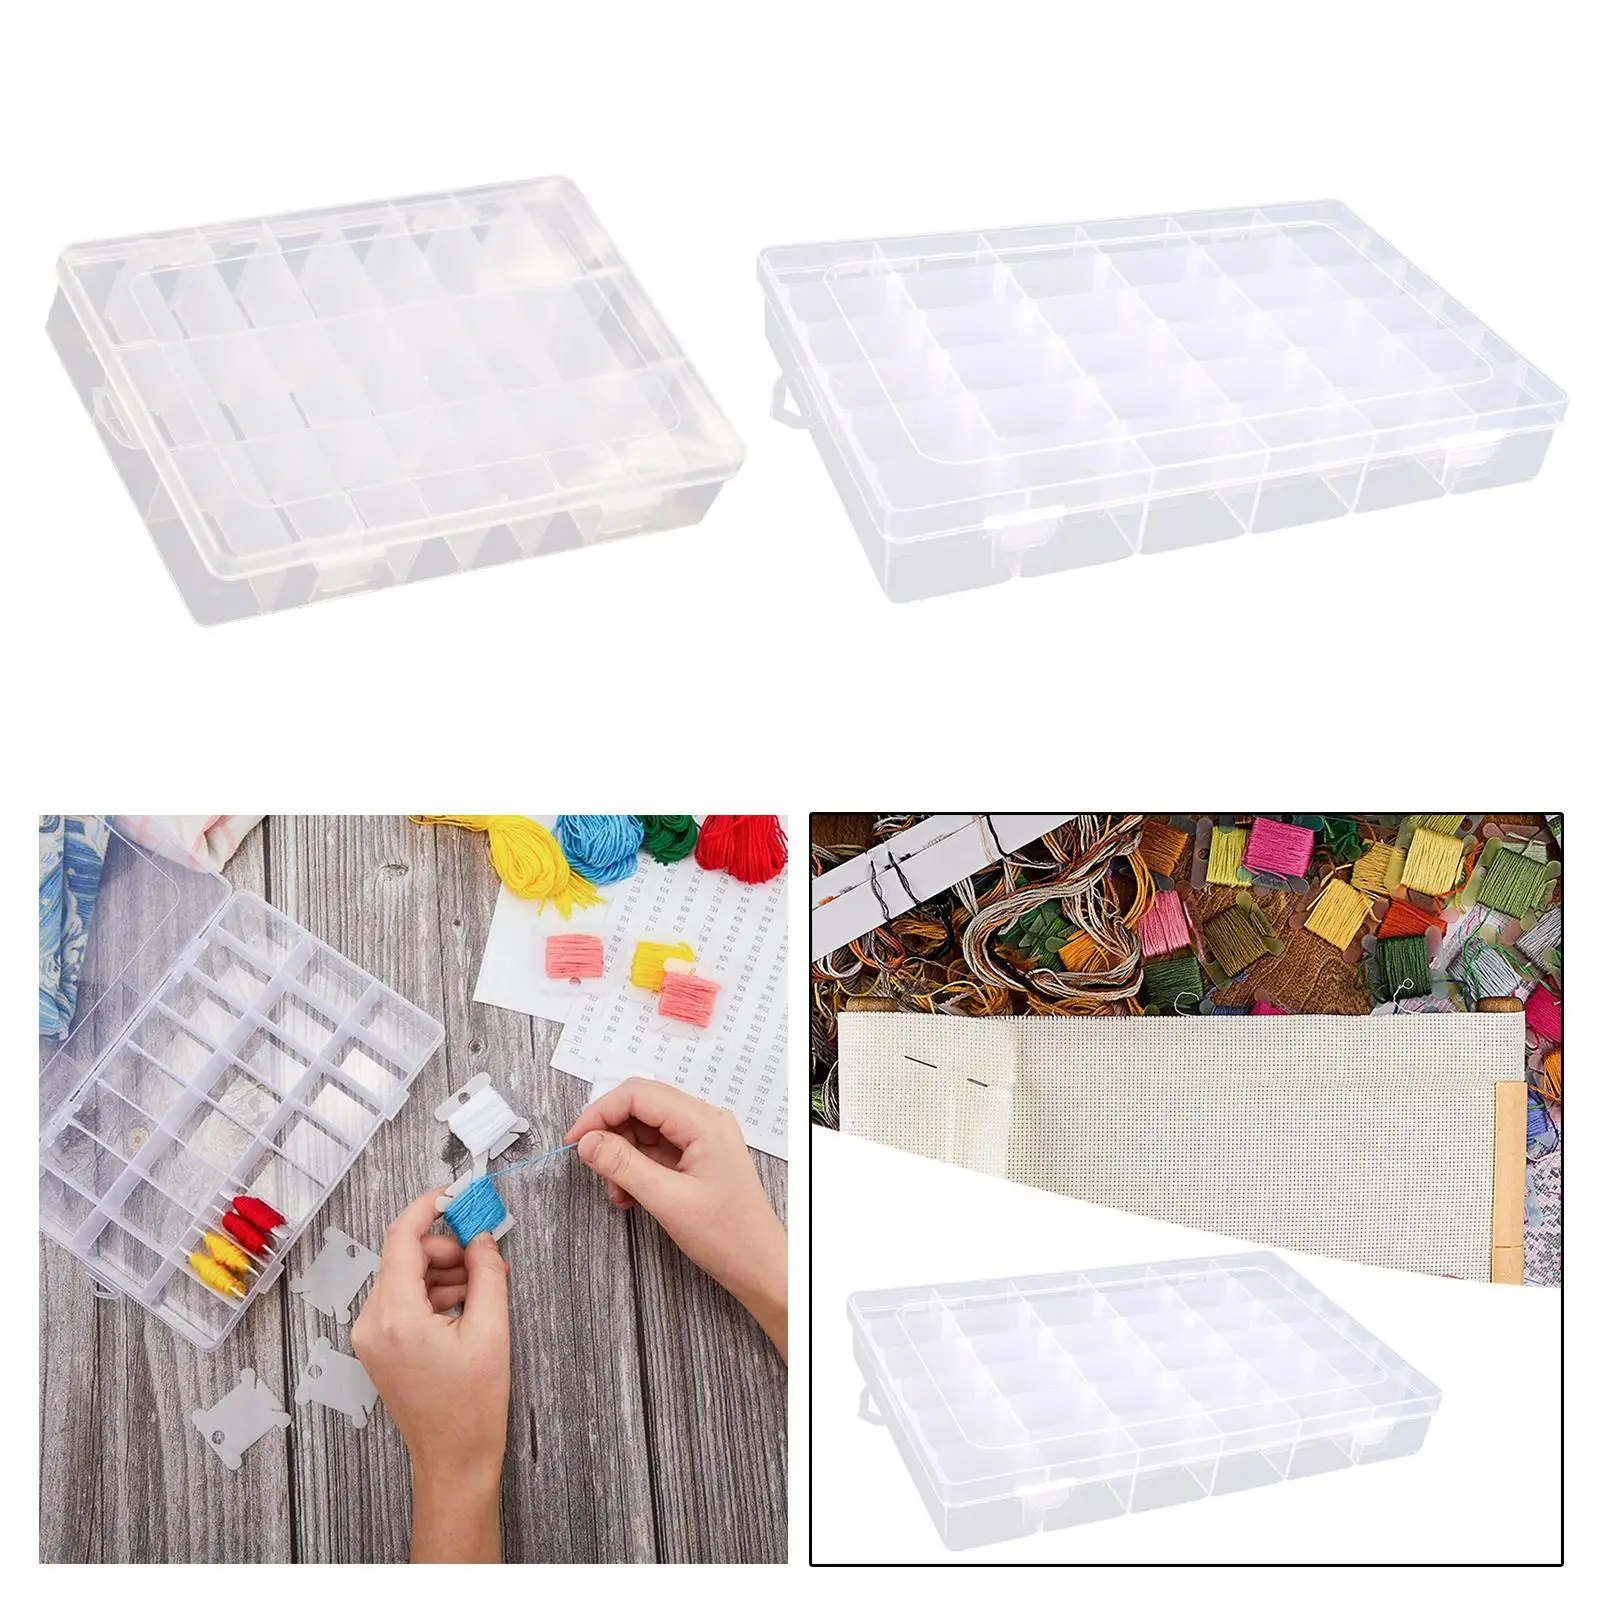 Sewing Thread Storage Box Carry Case Grids Embroidery Sewing Thread Holder for Fishing Tackles Embroidery Threads Crafts Jewelry